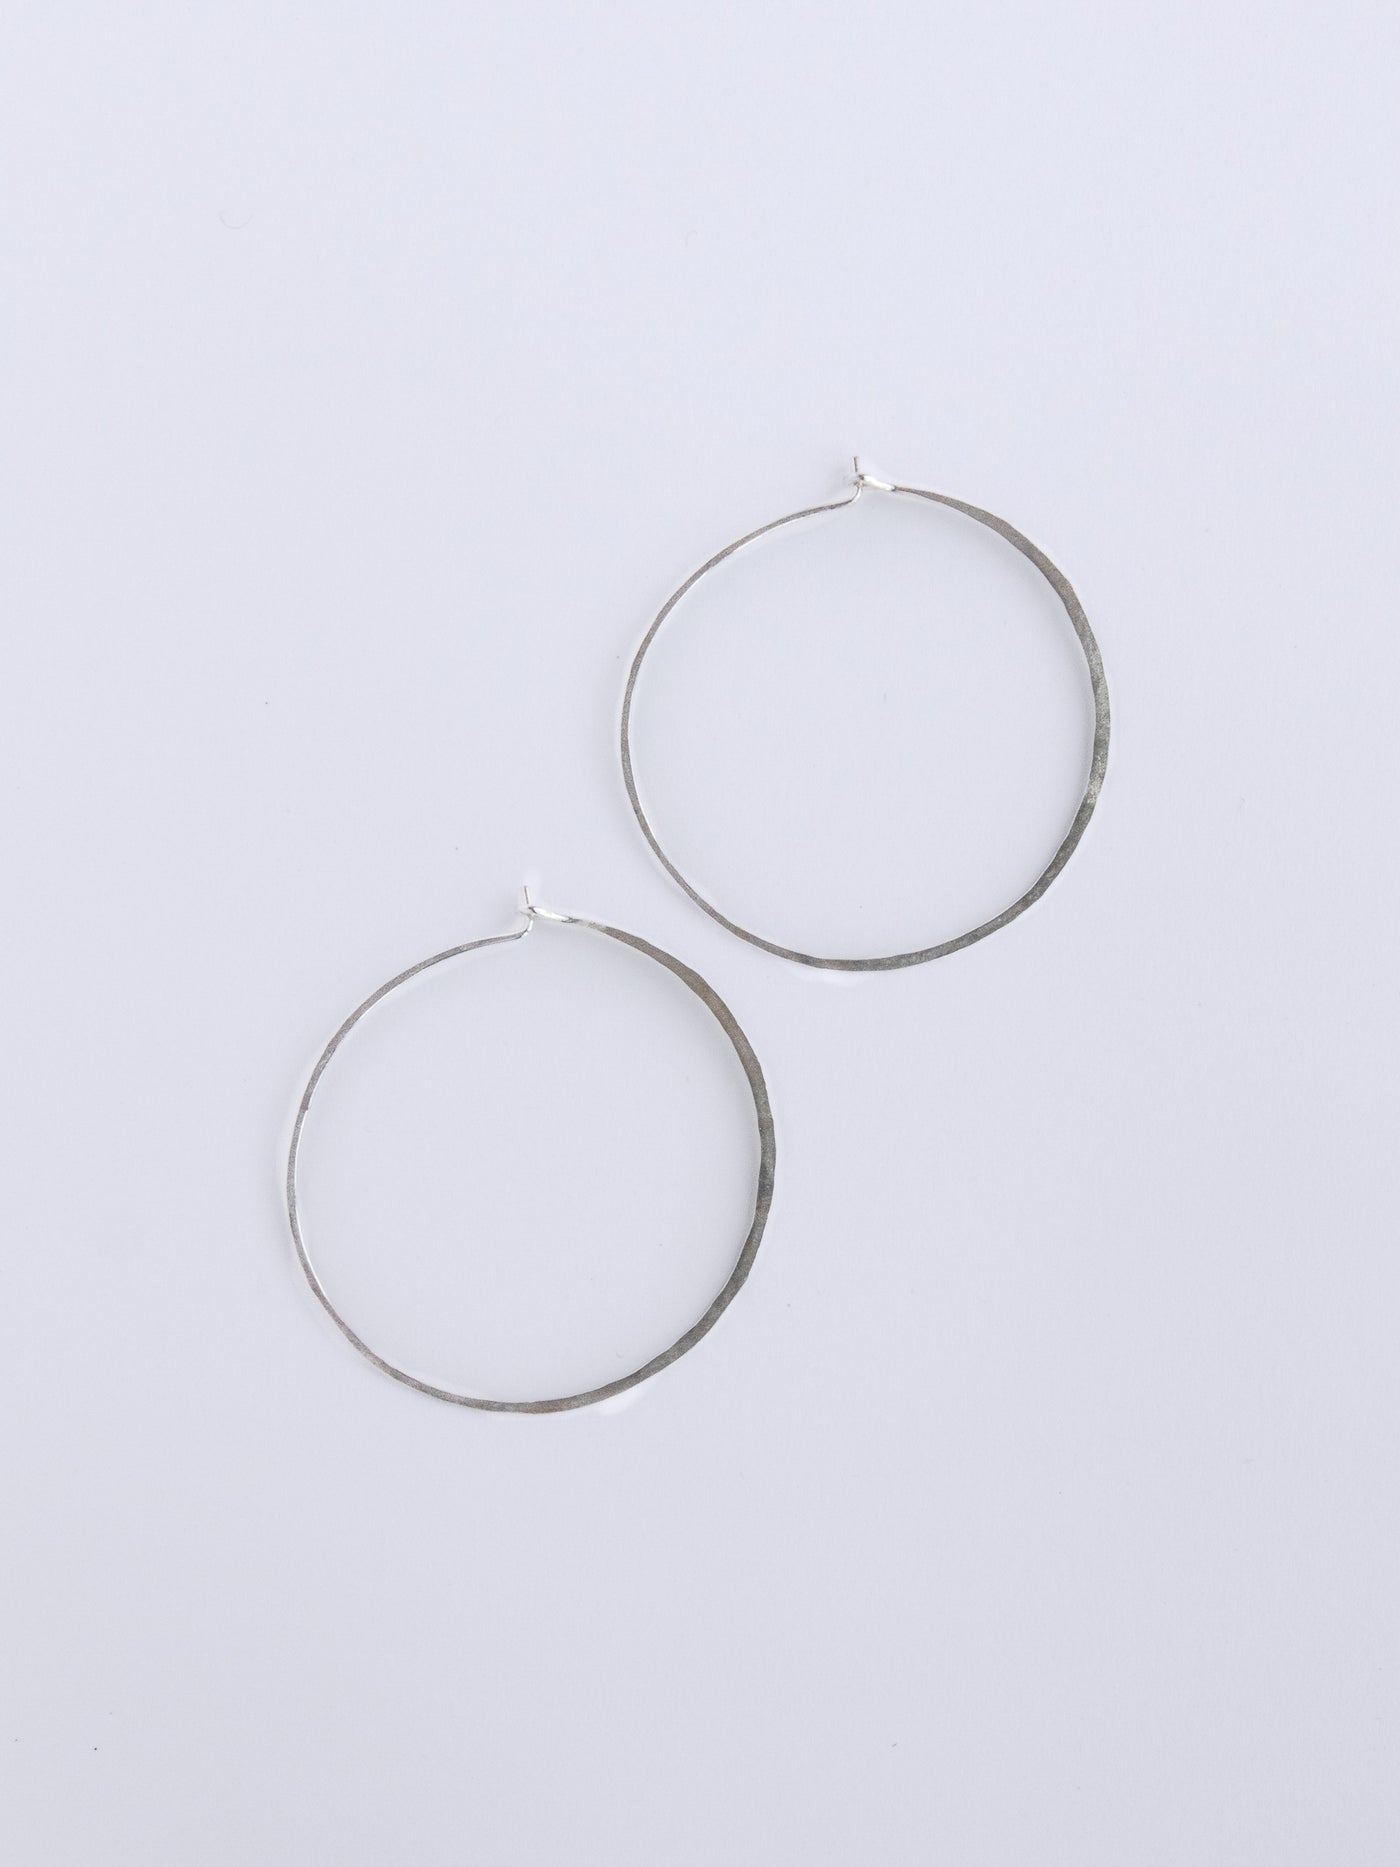 Silver Large Crescent Moon Hoops made from 20 gauge wire are hand made with high quality hammered sterling silver metal and measure 1.5" across.